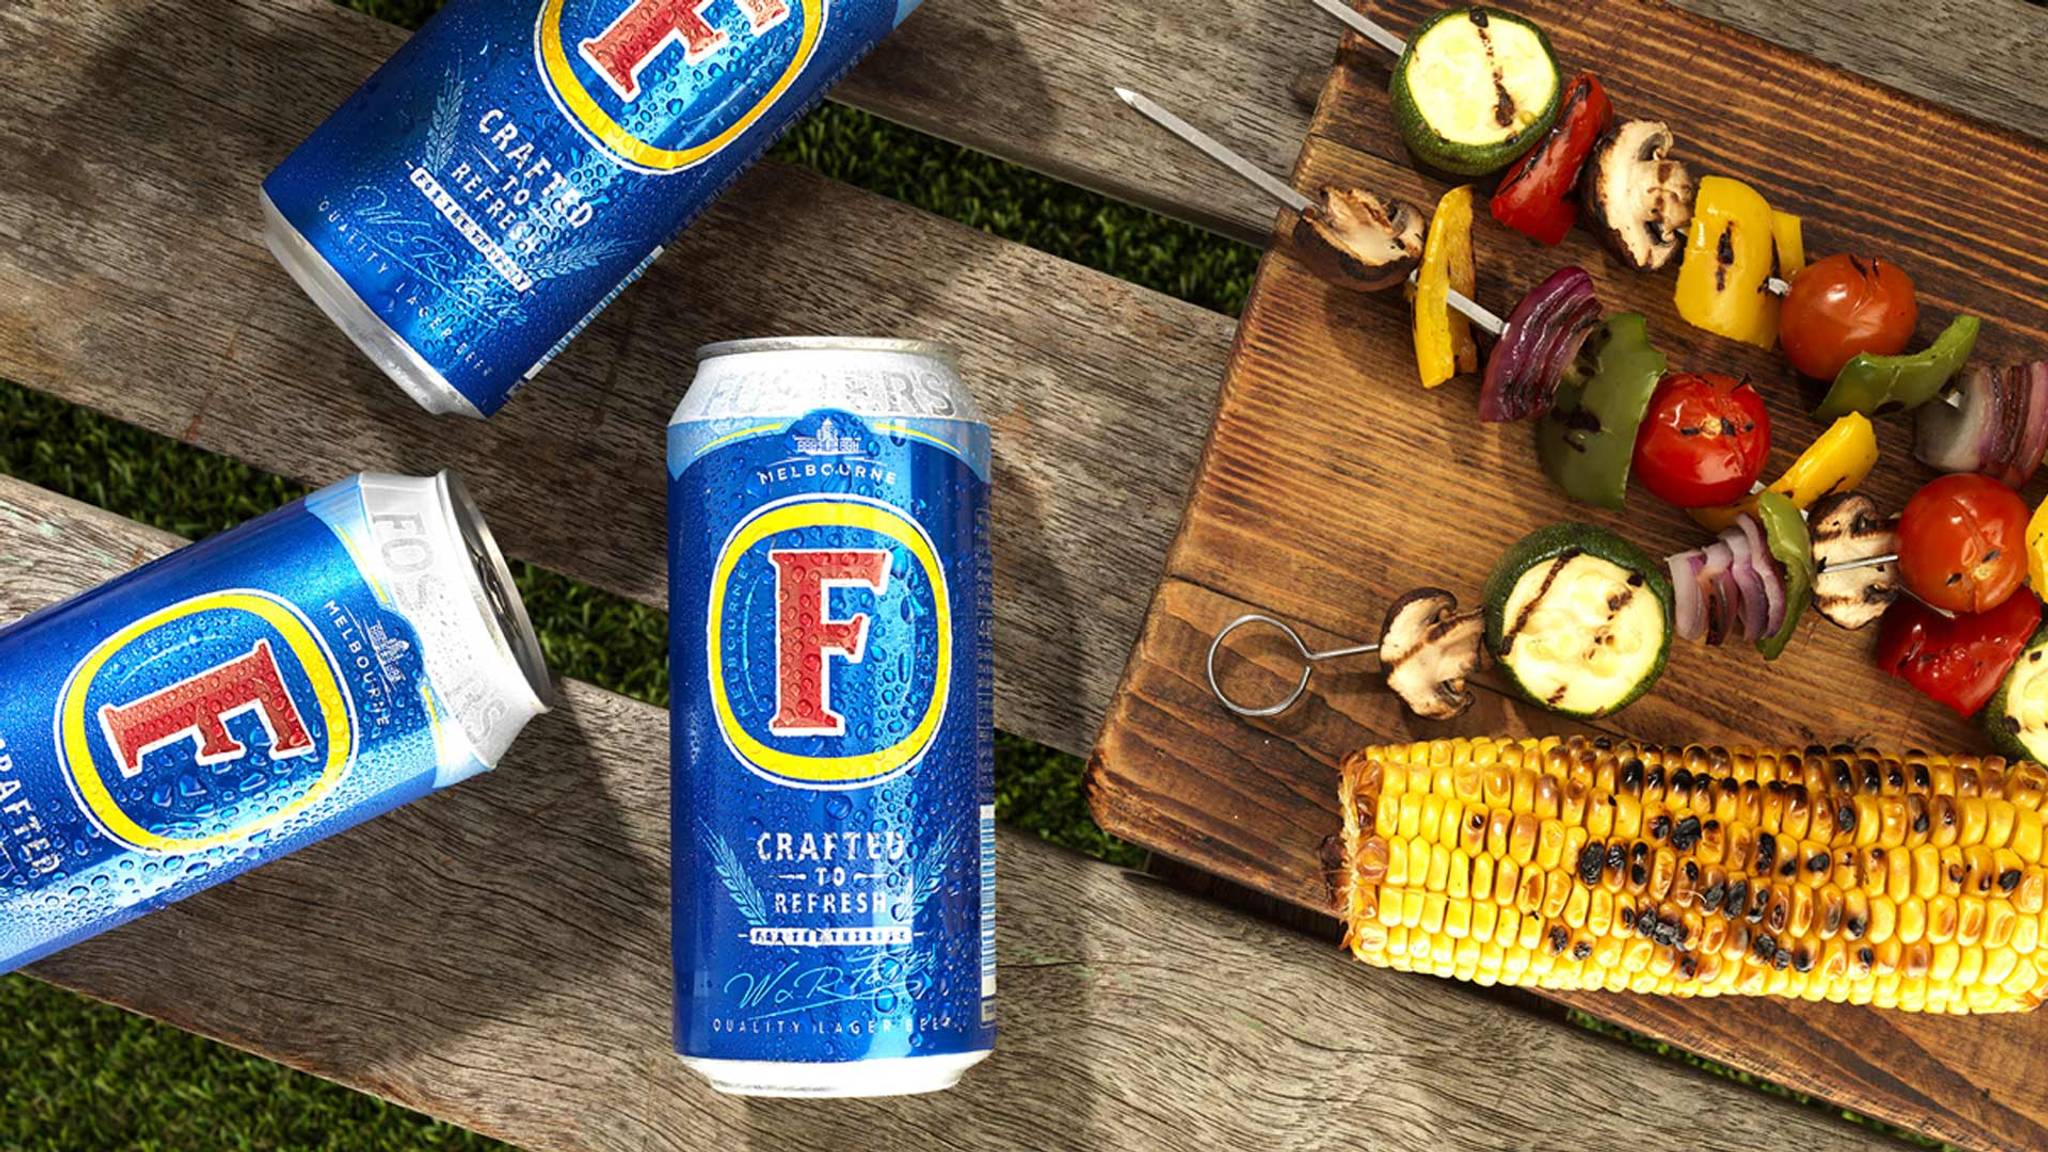 Foster’s: global beer goes local again